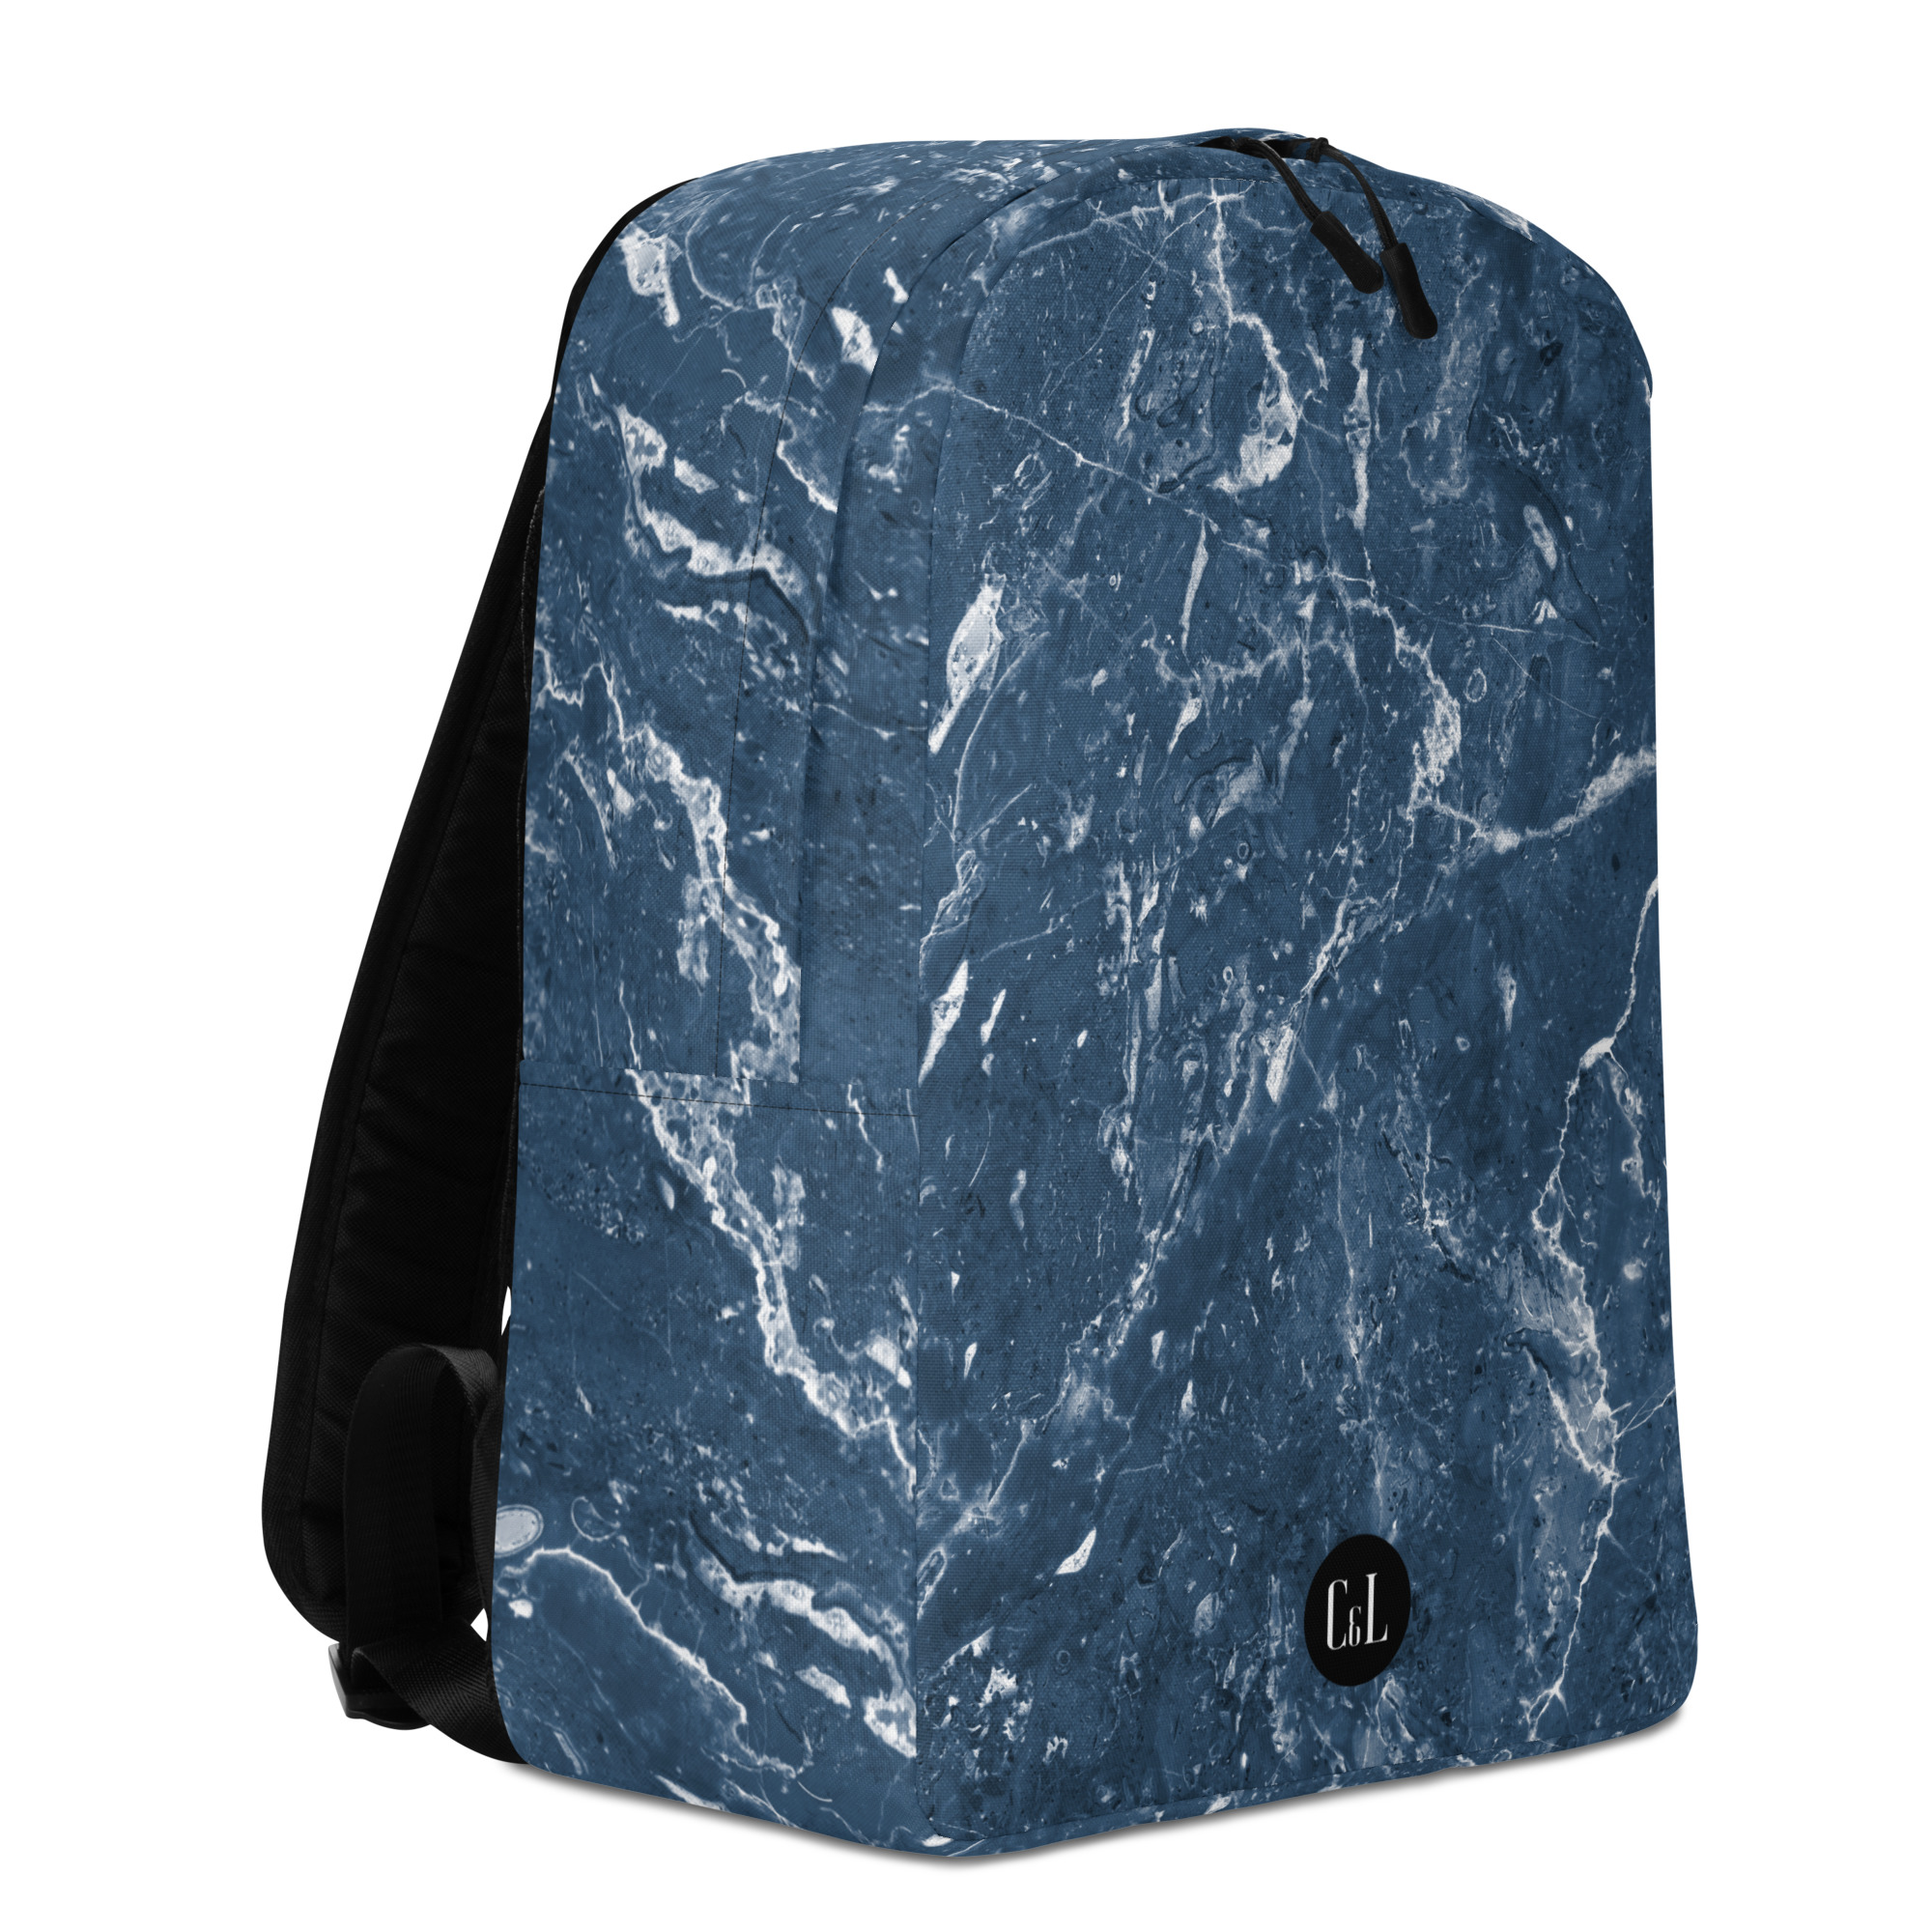 all-over-print-minimalist-backpack-white-right-6480517a9377e.jpg